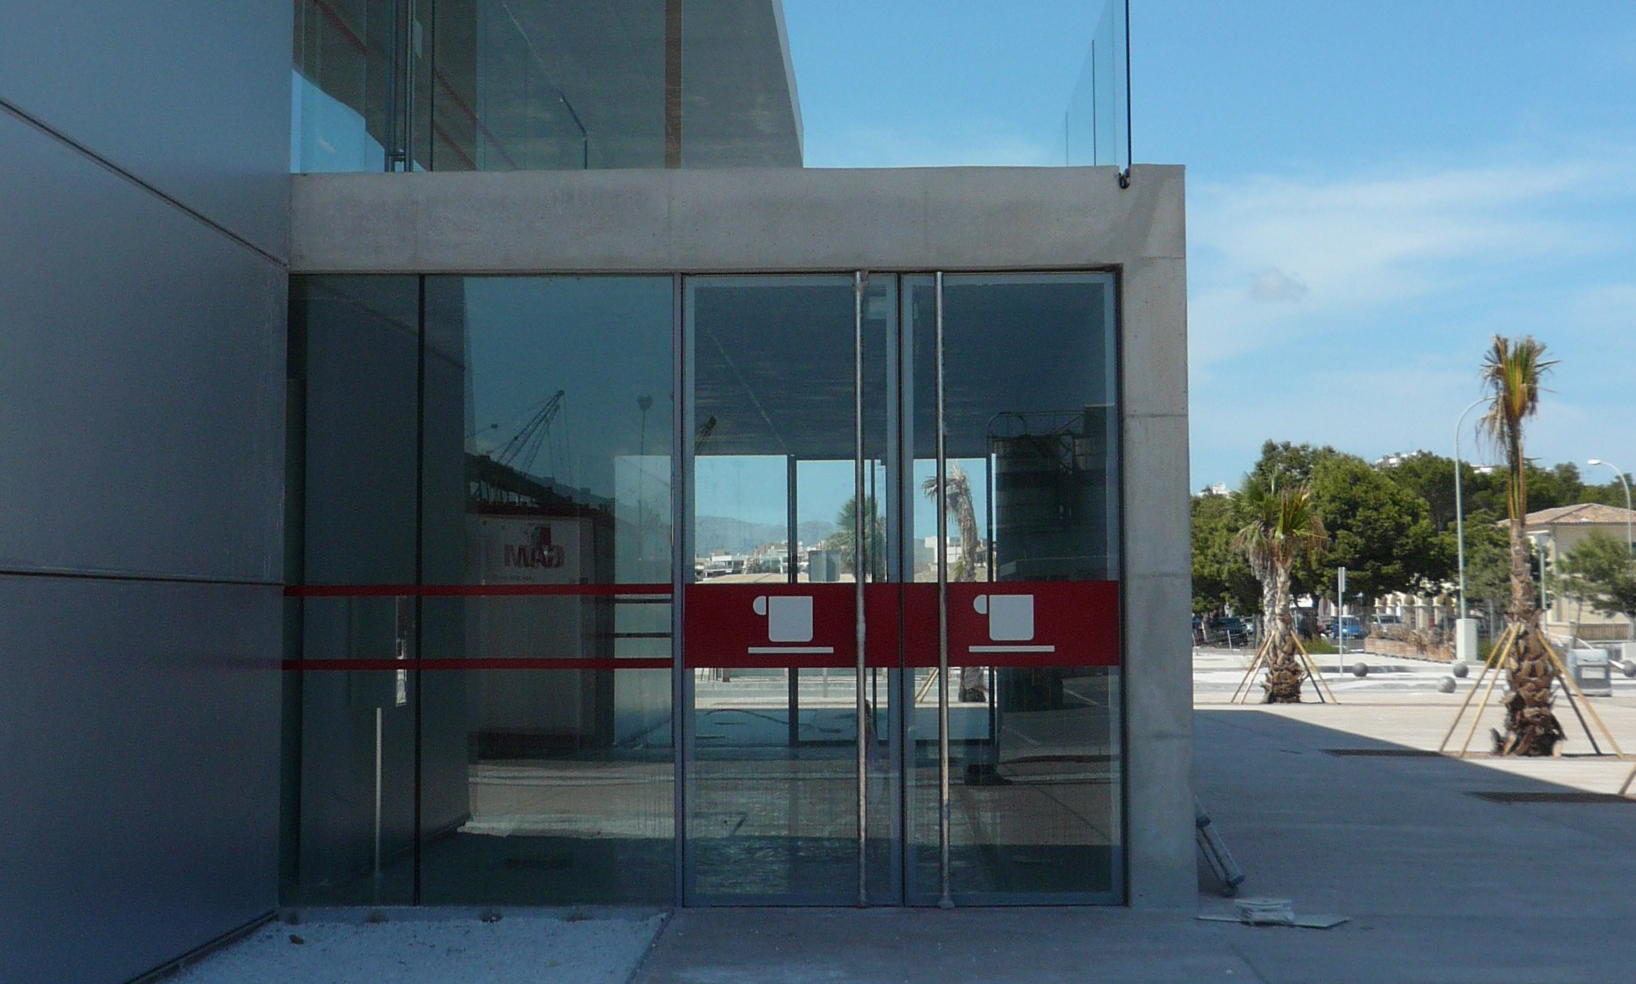 The APB puts running of bar-cafeteria at the port of Alcudia out to tender